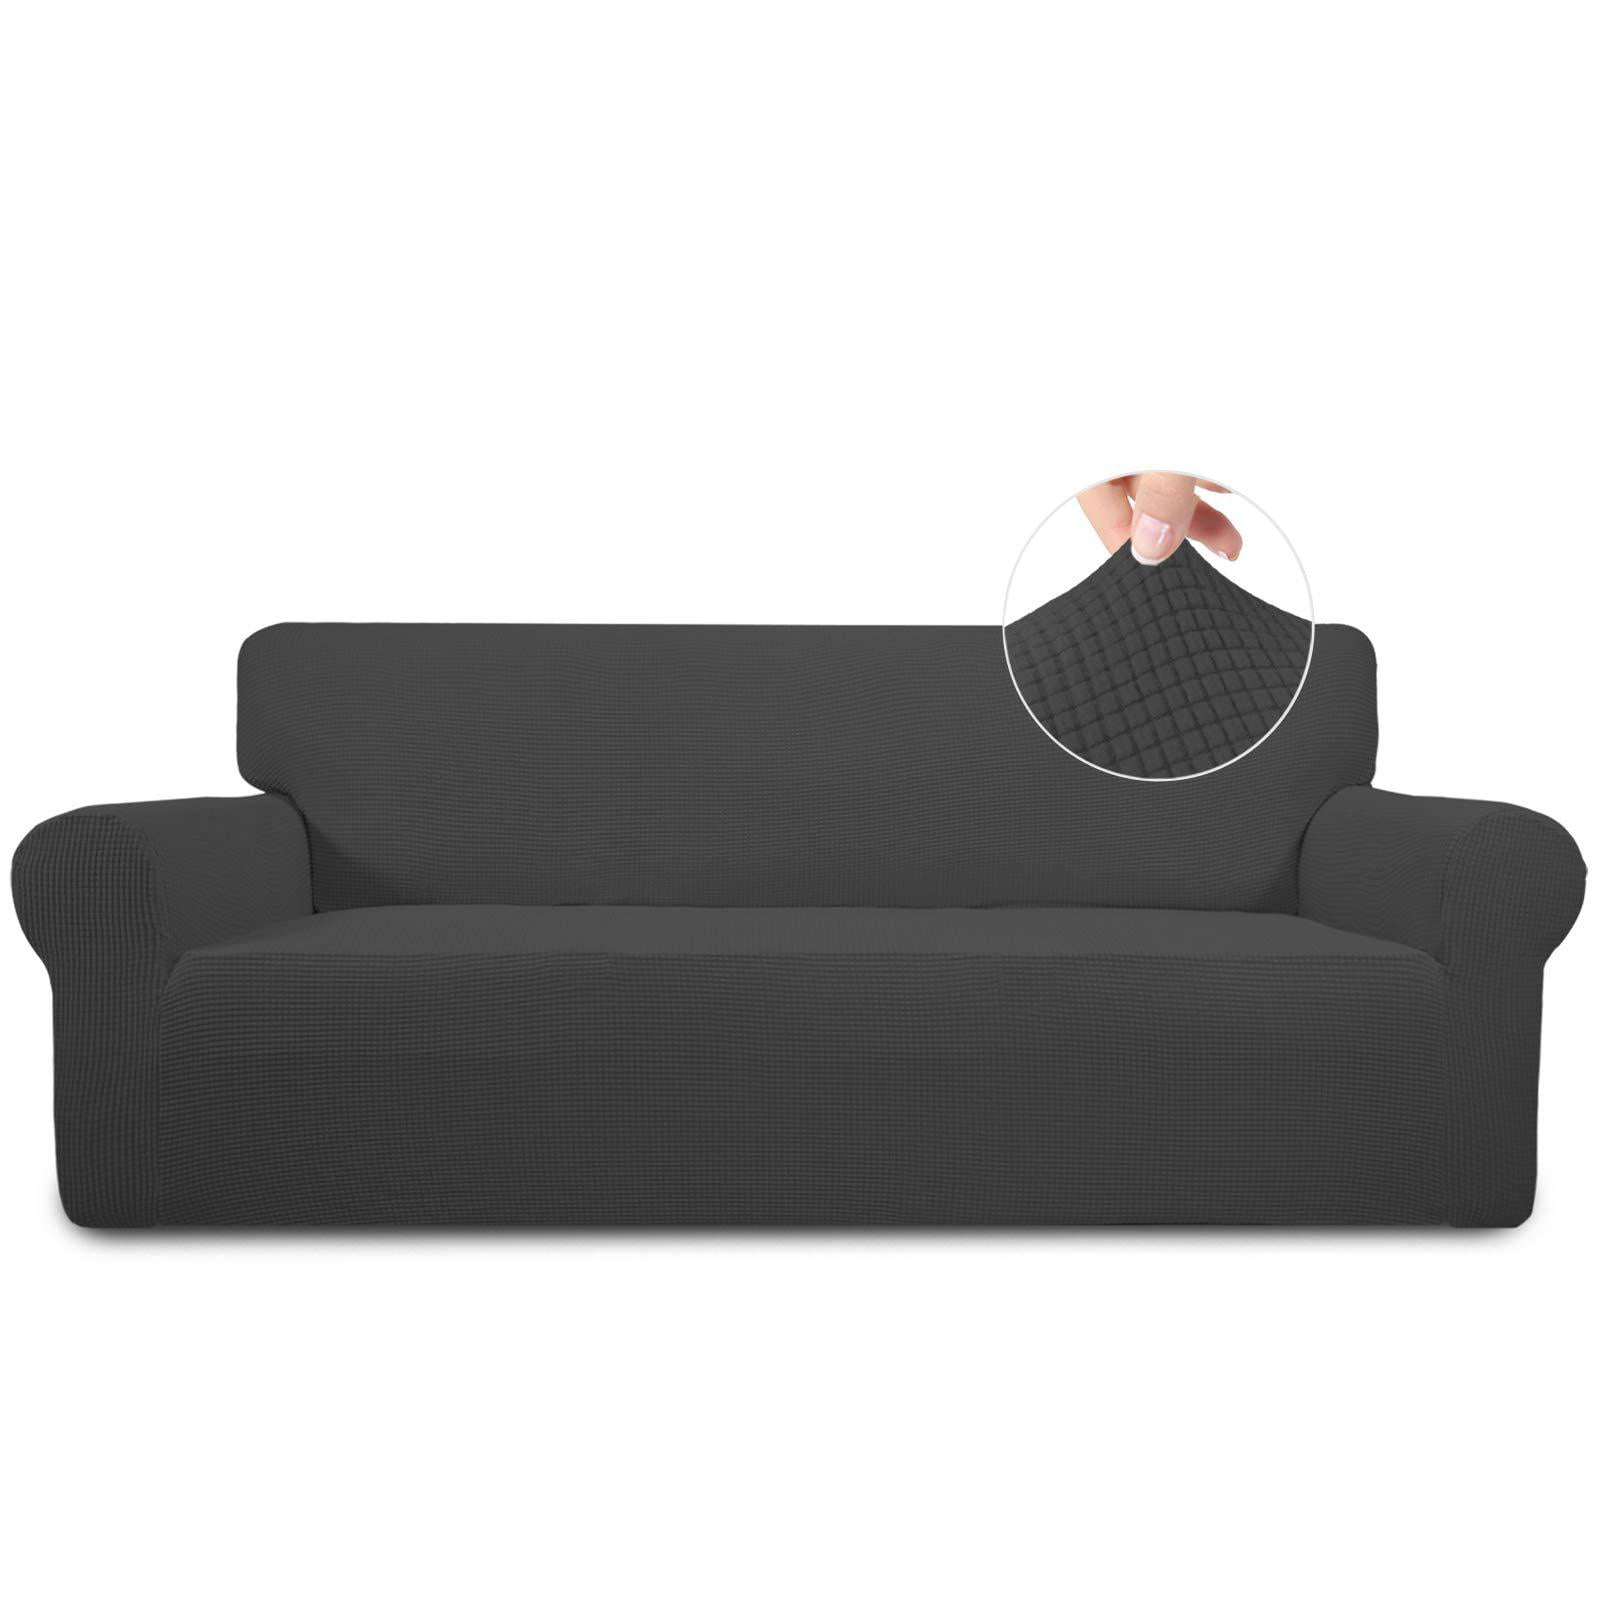 Loveseat, Dark Gray Easy-Going Fleece Stretch Sofa Slipcover – Spandex Non-Slip Soft Couch Sofa Cover Pets Washable Furniture Protector with Anti-Skid Foam and Elastic Bottom for Kids